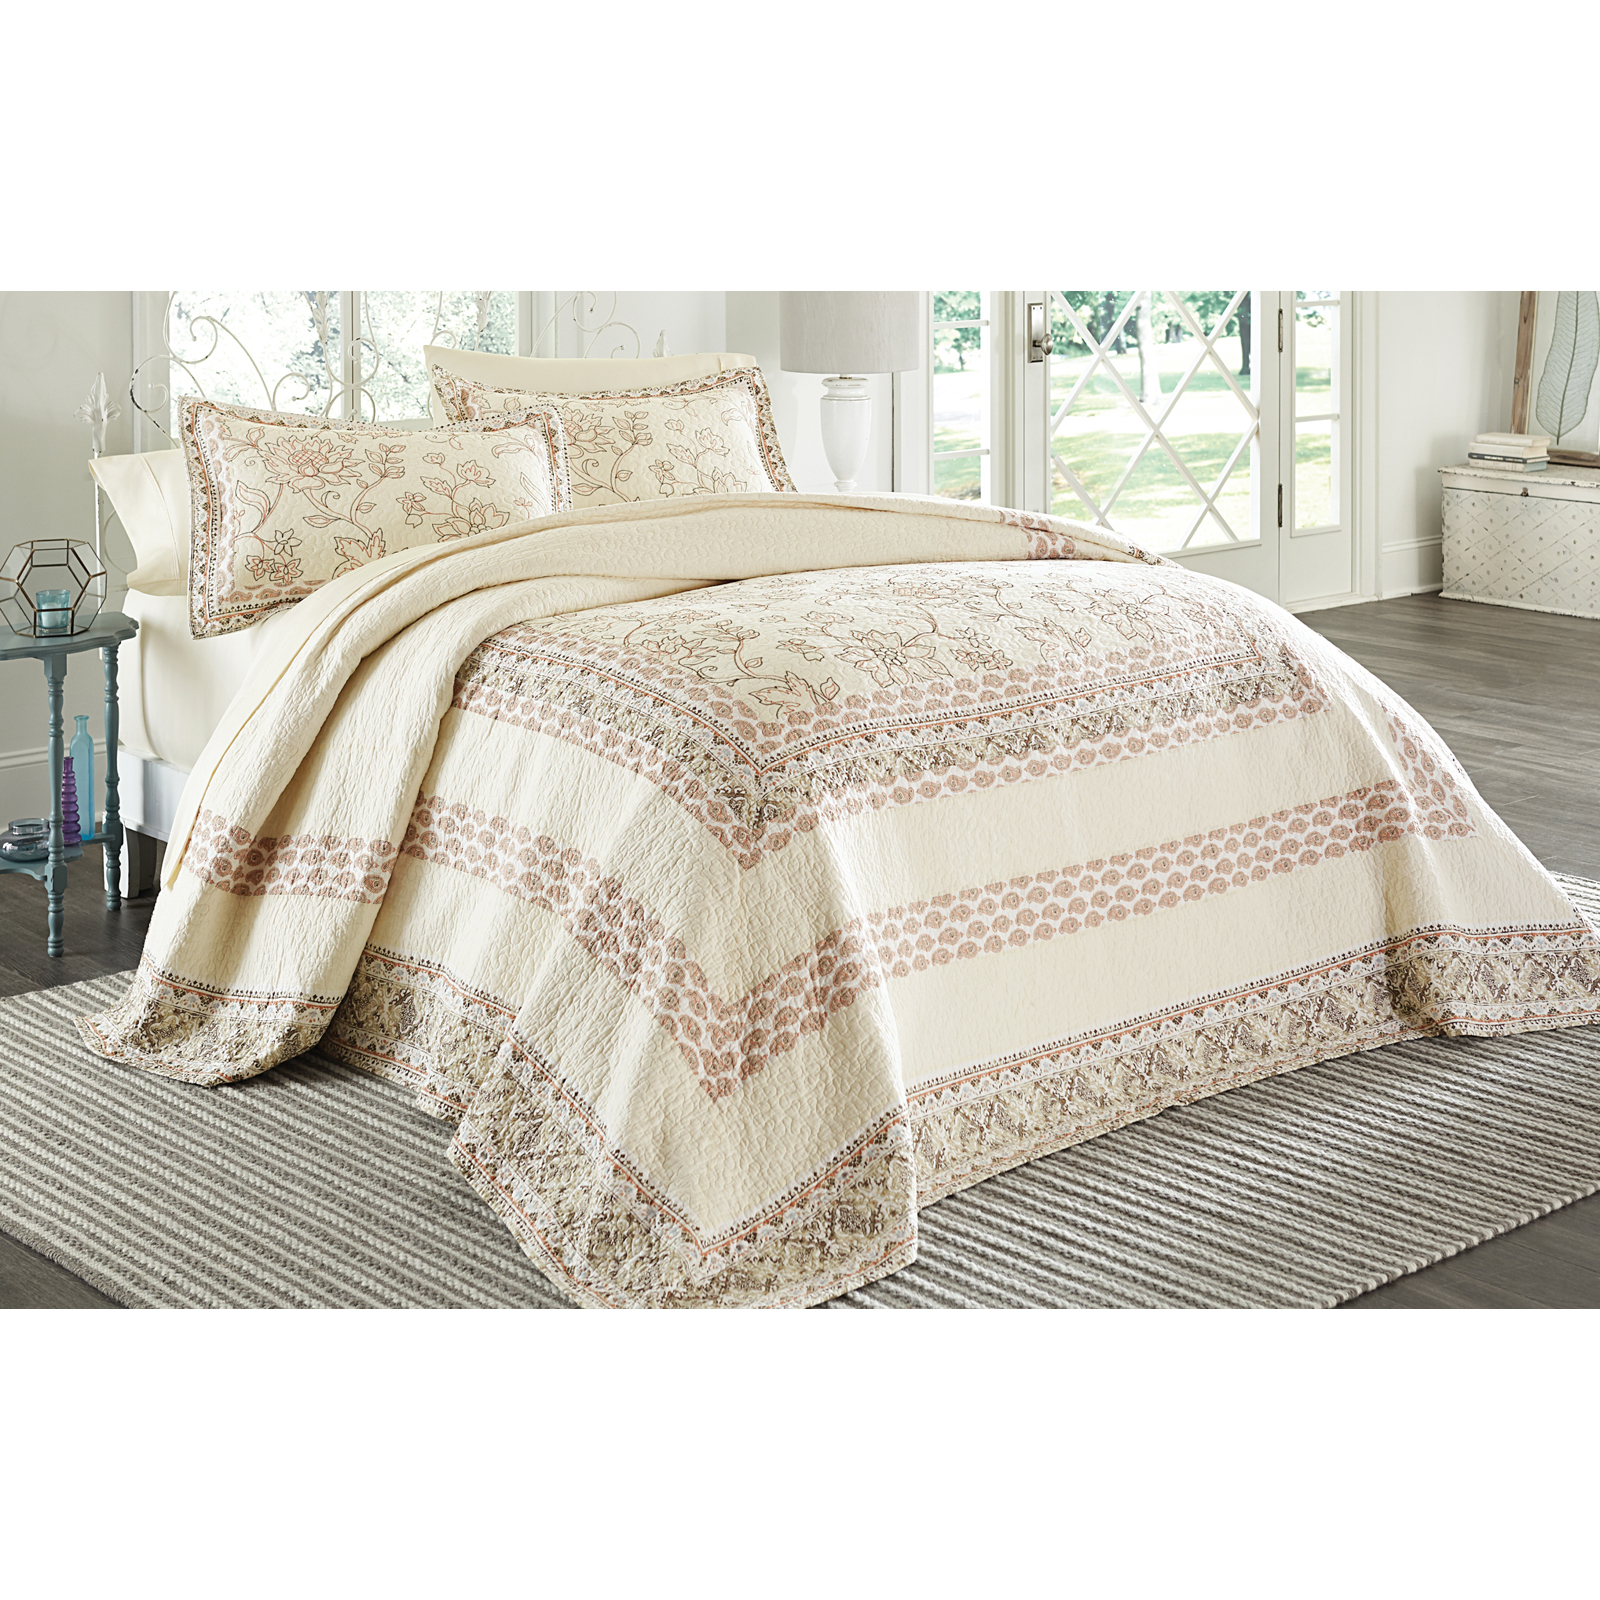 Cannon Wandering Vine Embroidered Bedspread